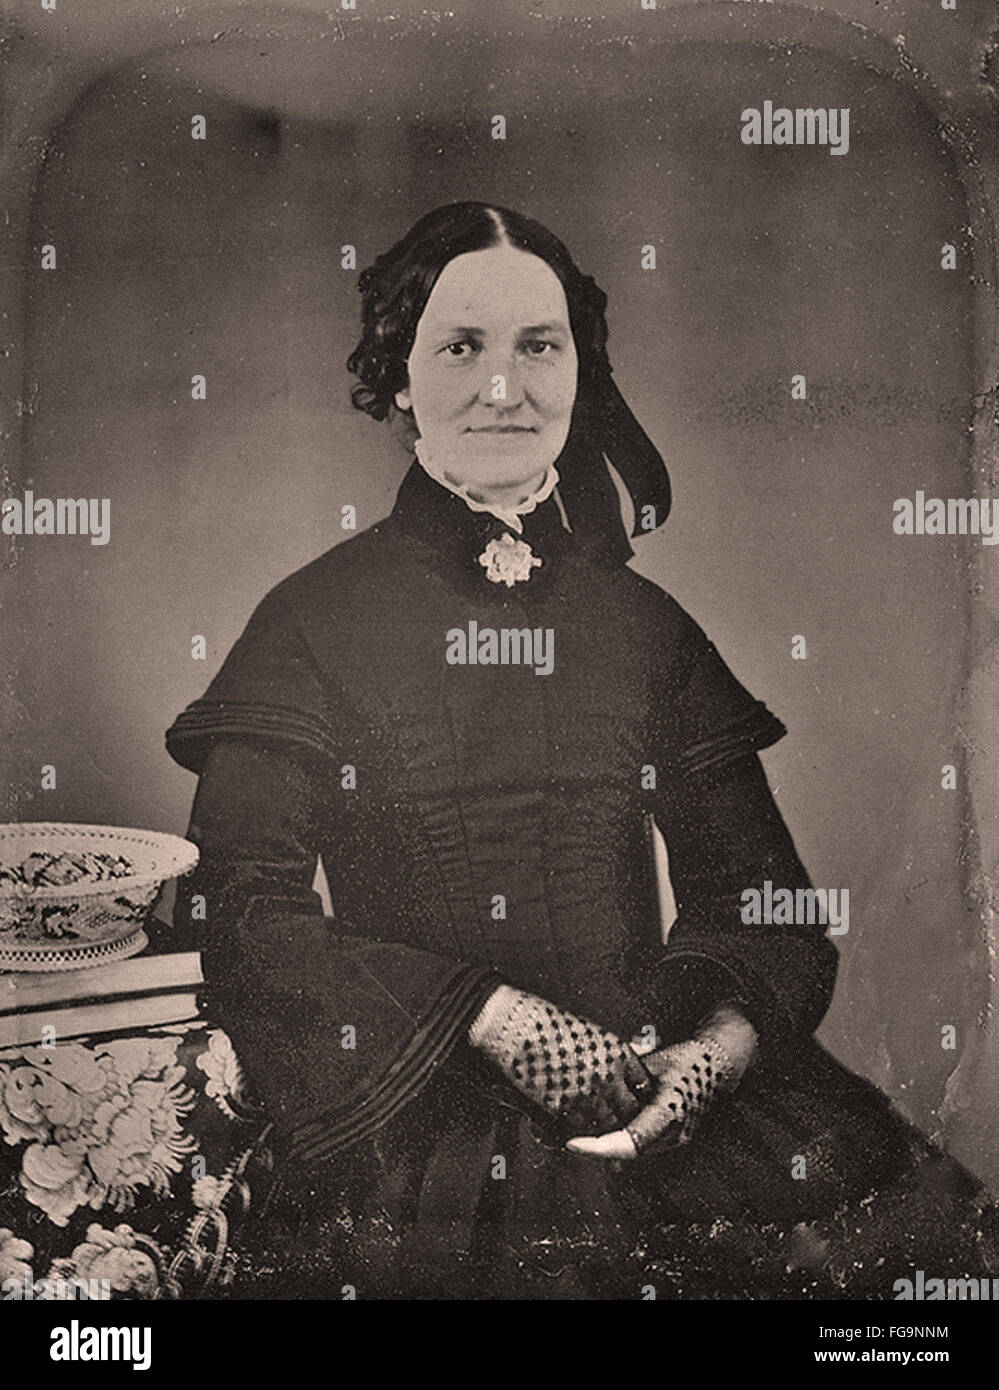 Women in Mourning Dress from the Victorian Era Stock Photo